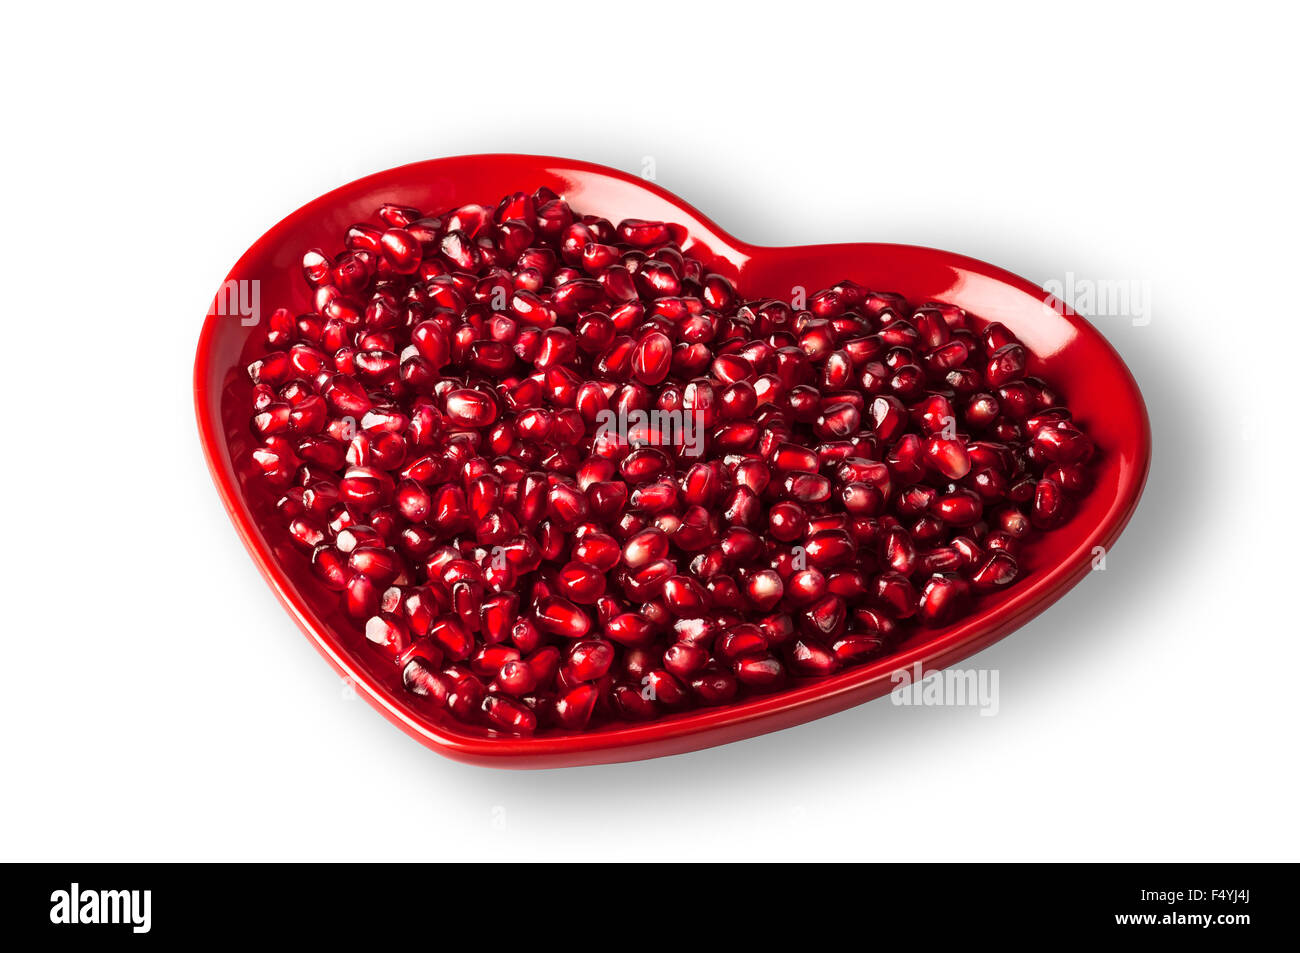 Red heart shaped plate full of delicious ripe juicy pomegranate seeds Stock Photo